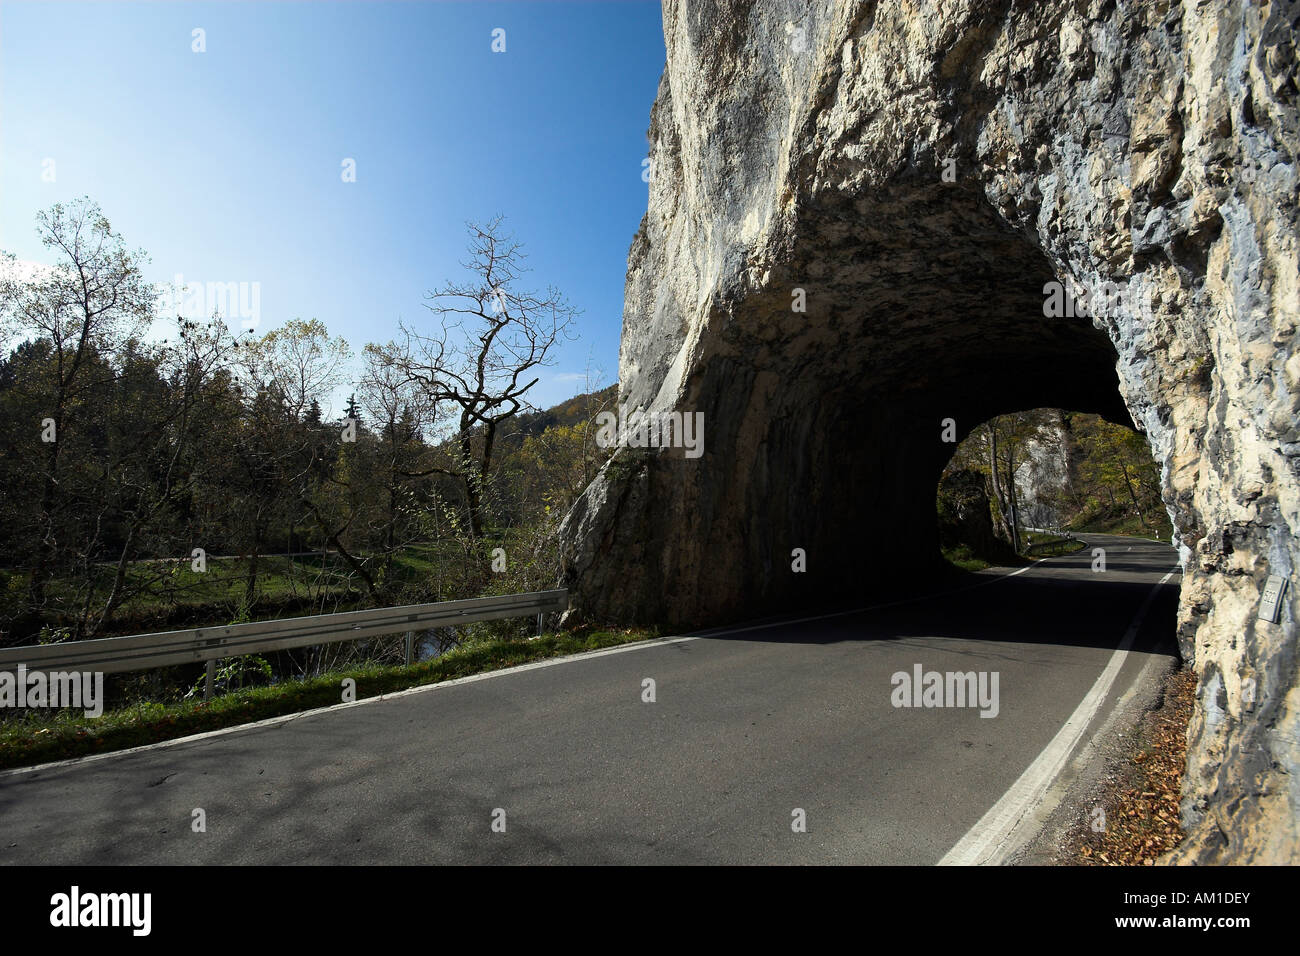 Tunnel through a rock at the Donautalstrasse, rural district Sigmaringen, Baden-Wuerttemberg, Germany Stock Photo